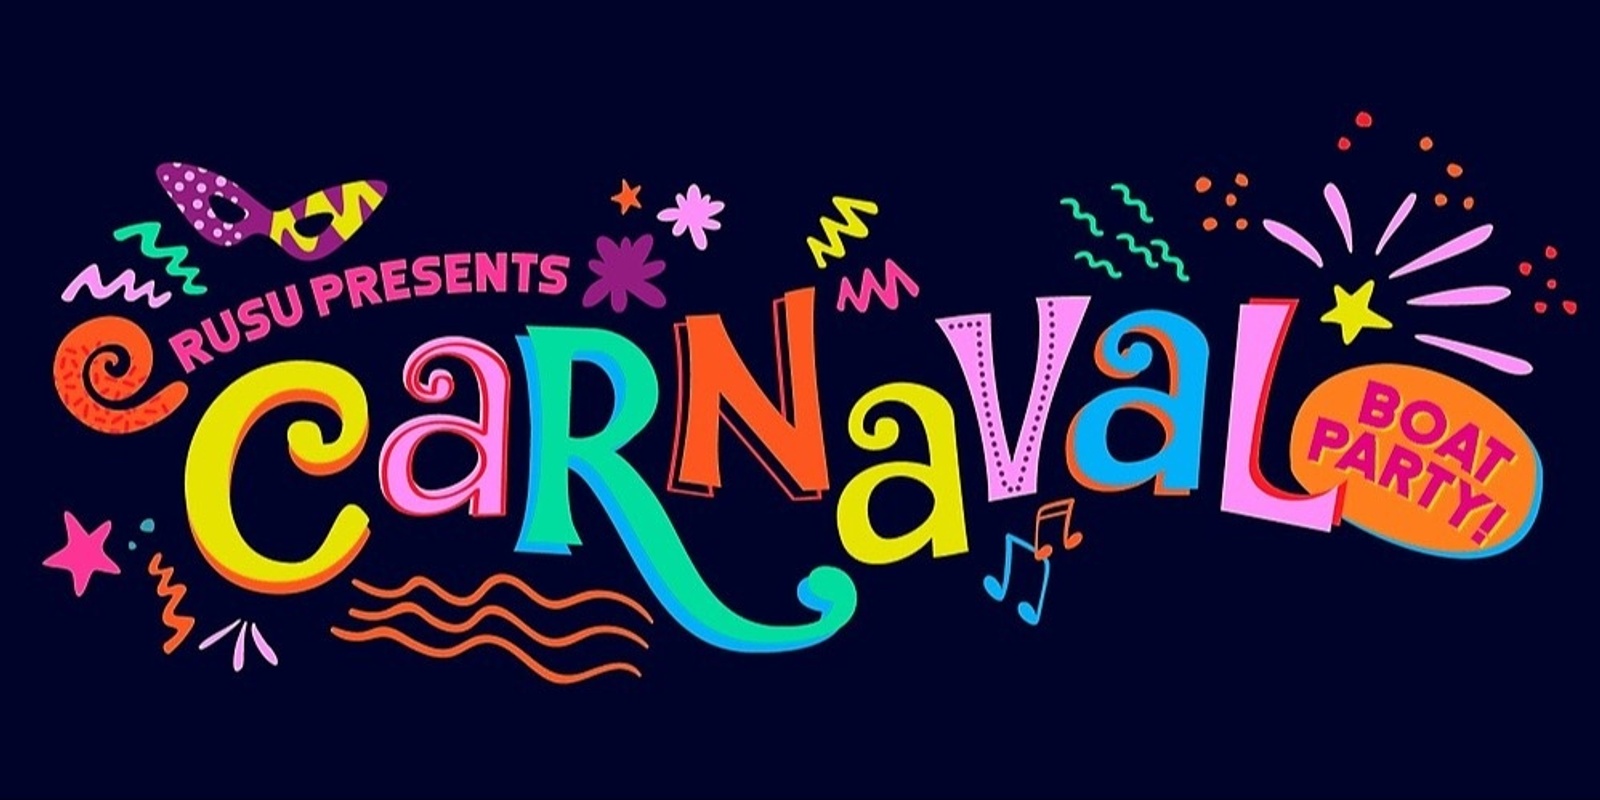 Banner image for RUSU Presents: Carnaval Boat Party!